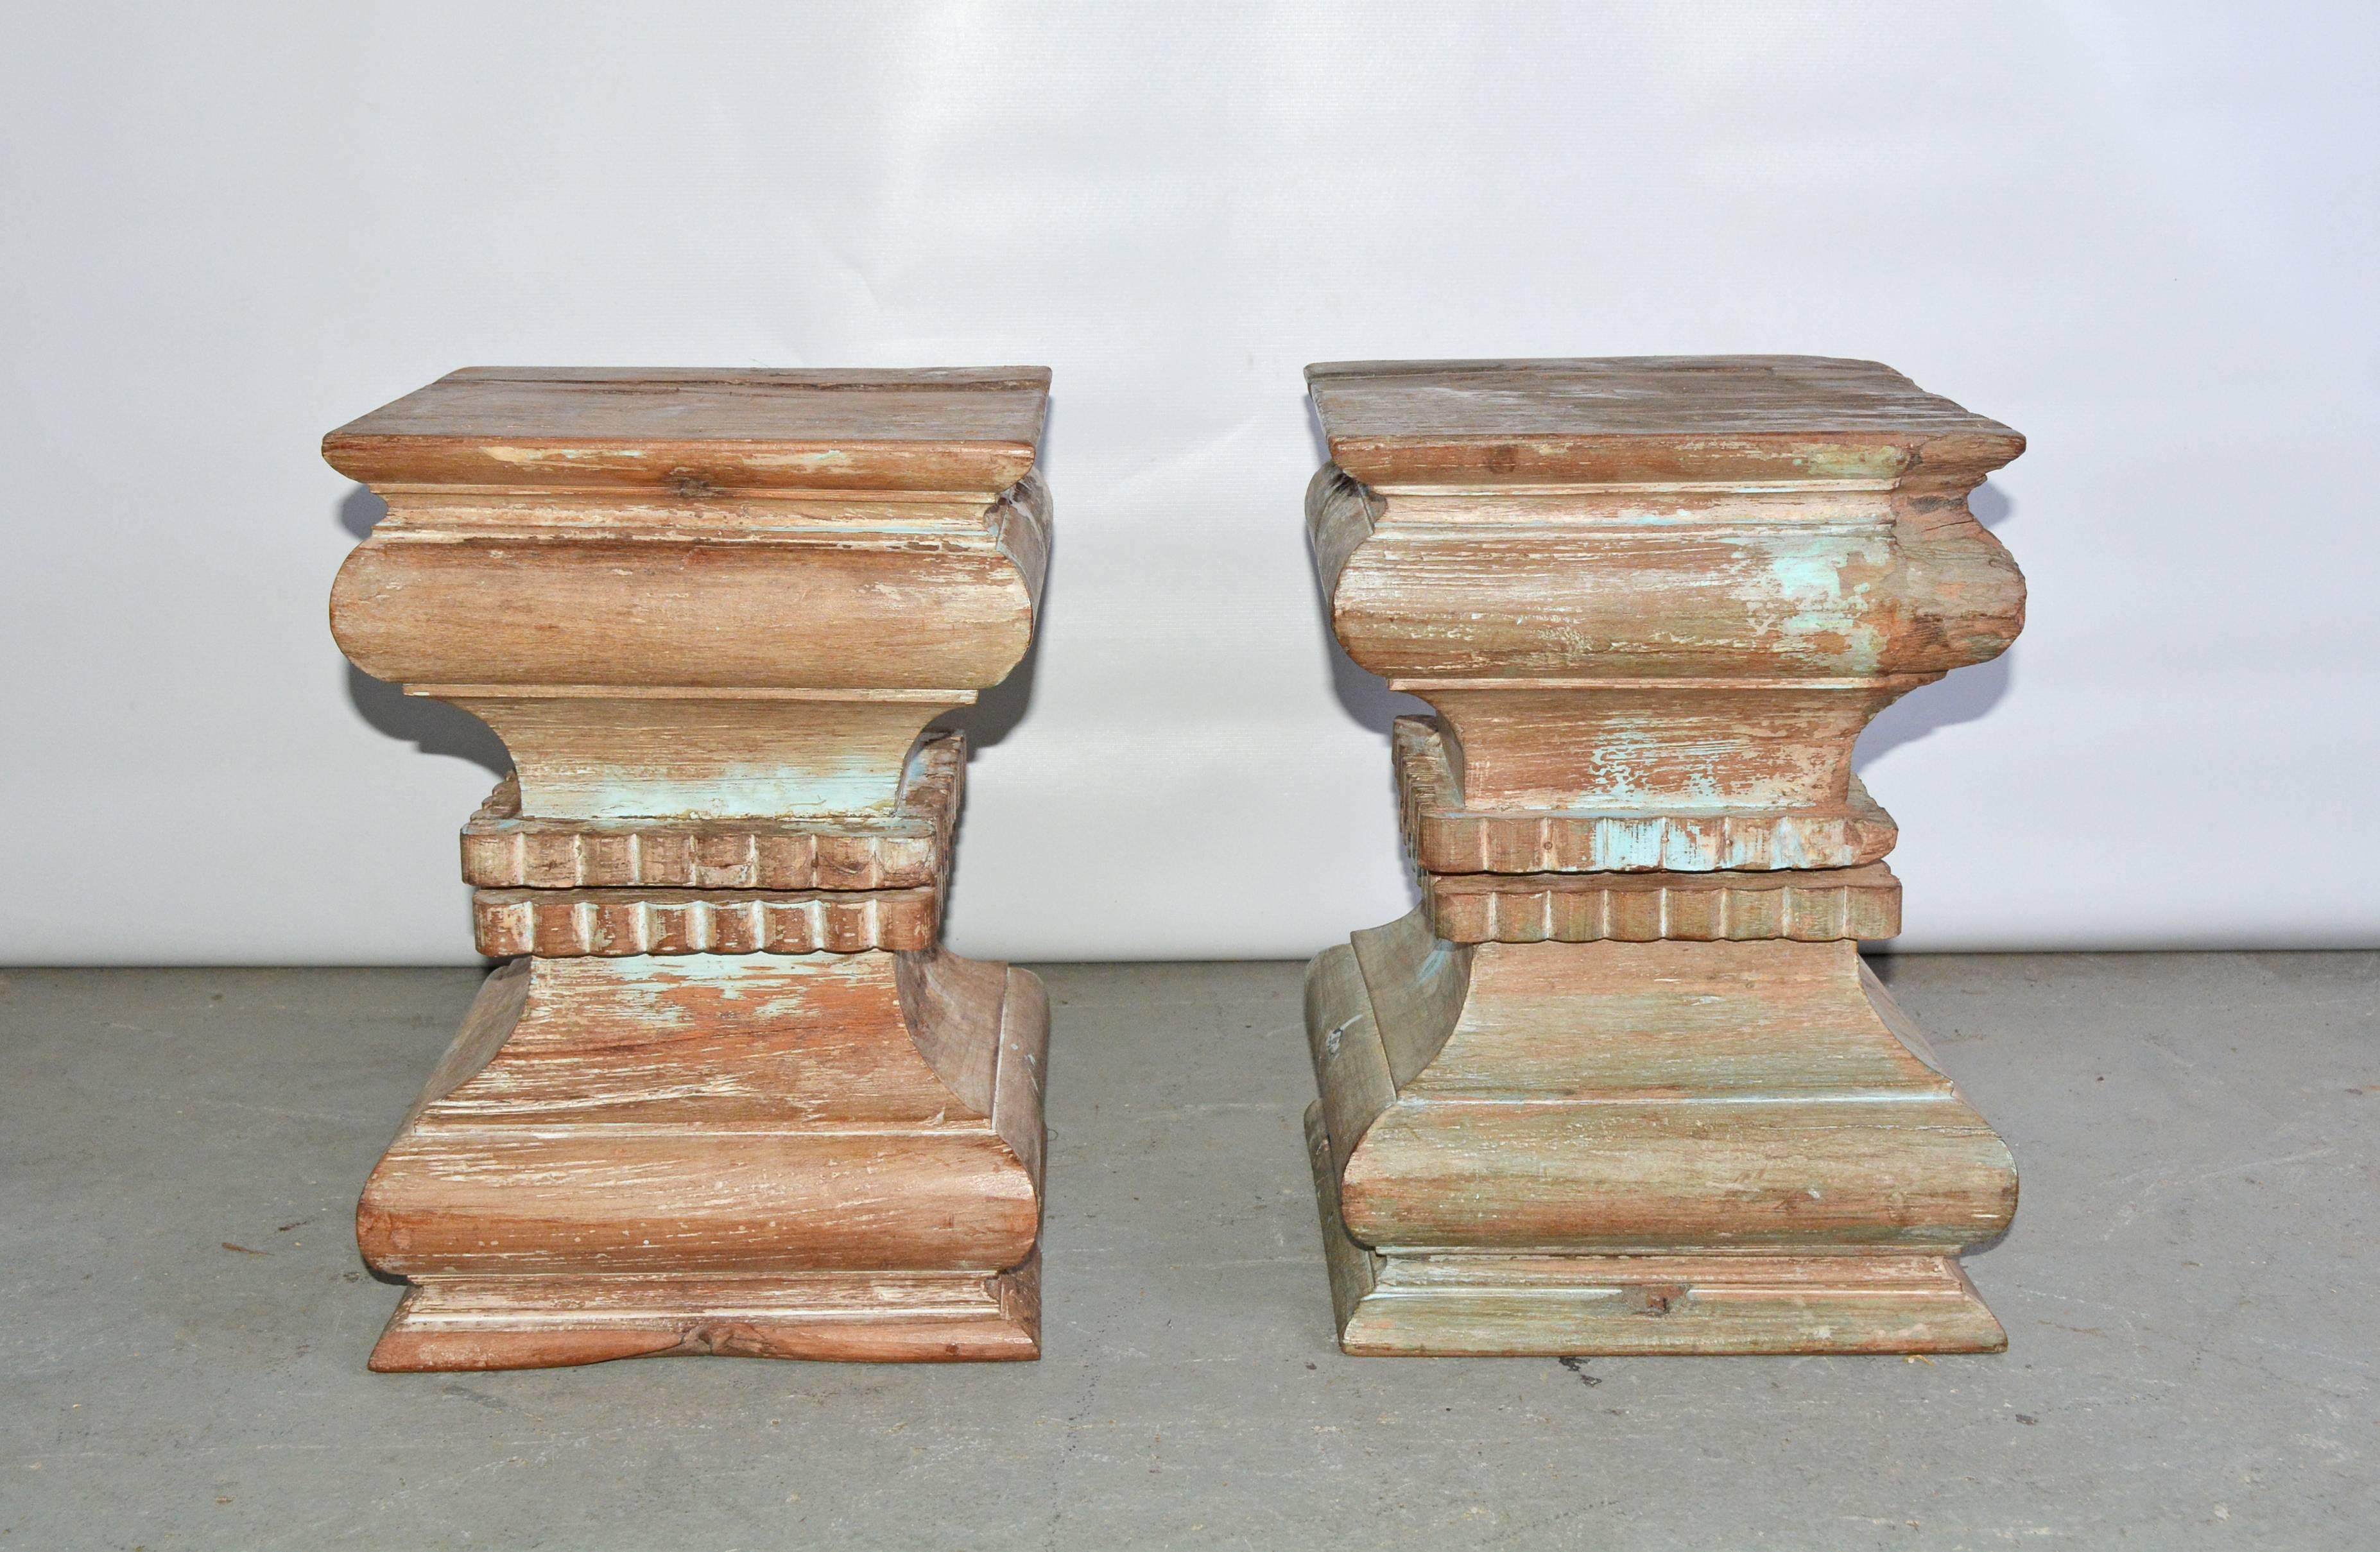 Two very special and very similar Indian carved wood pedestal, plinth, table bases or stools.  Beautifully hand-carved with wonderful wood patina showing remnant of turquoise color paint. Once part of a column, reduced to a size usable as end